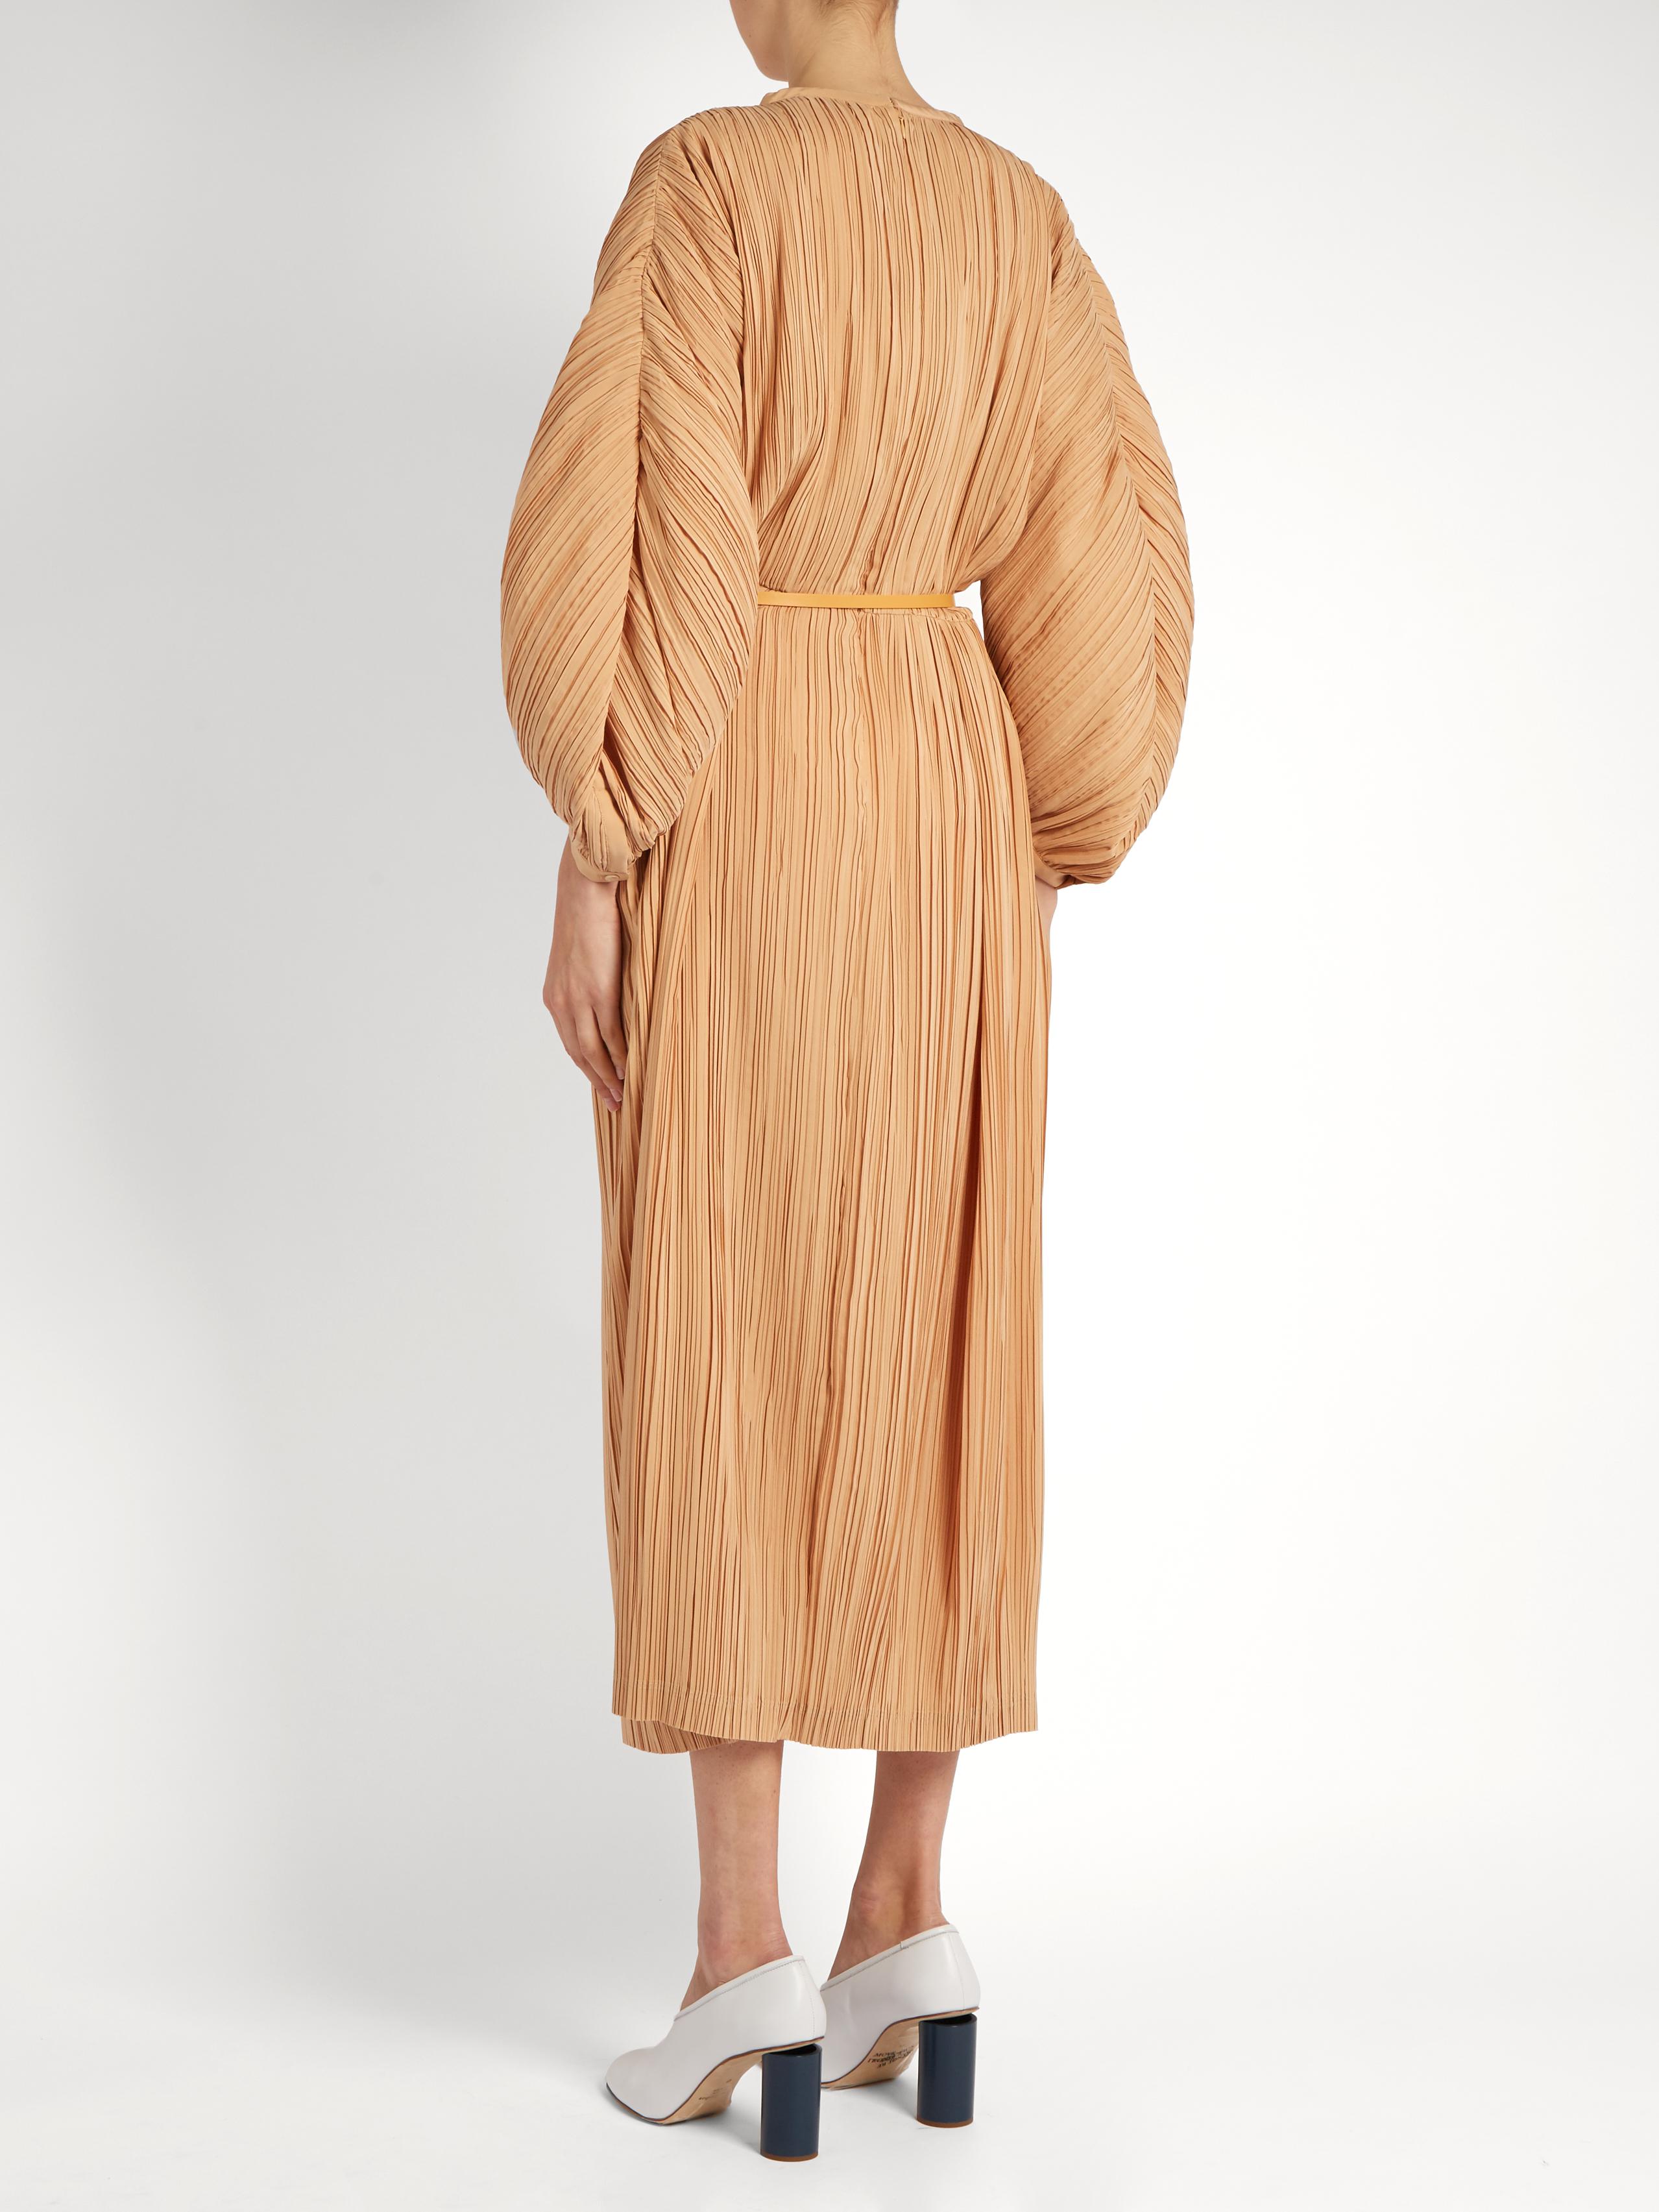 Jil Sander Carillon Zip-front Pleated Silk Dress in Natural | Lyst